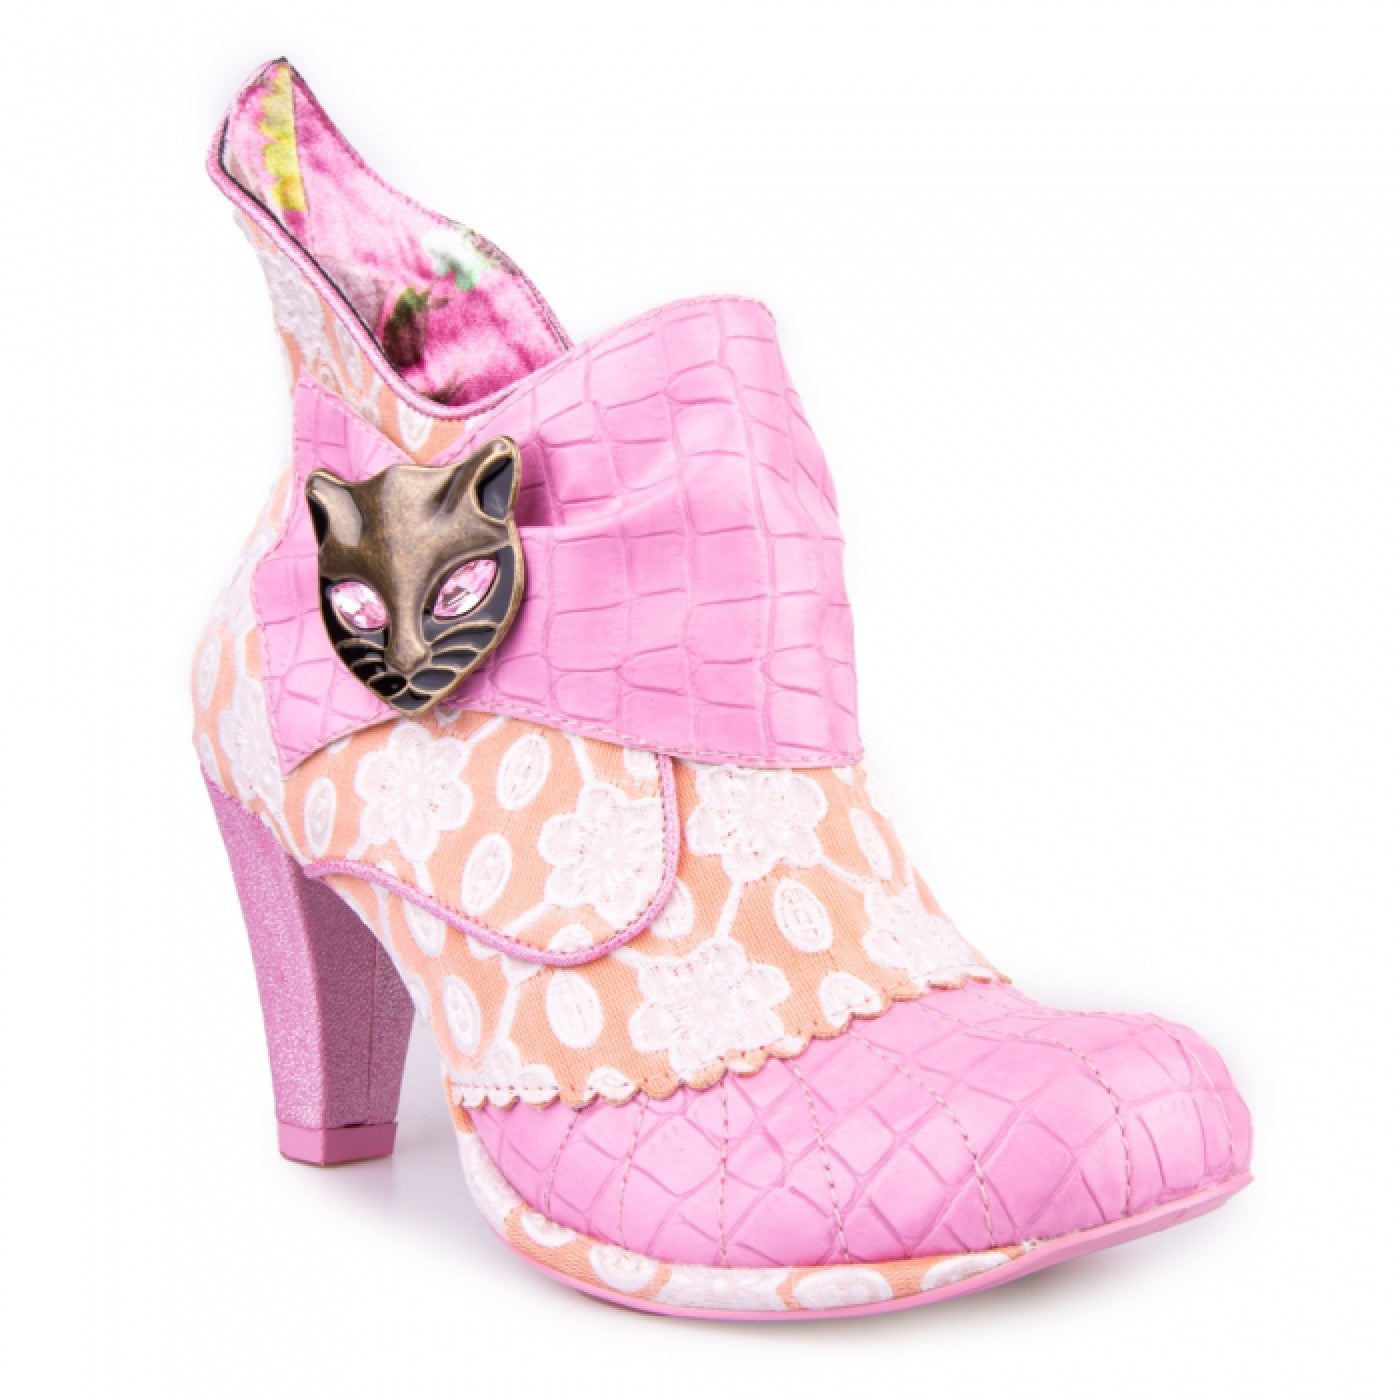 Irregular Choice - 🌸 SALE NOW £99 🌸 'Miaow' - a real Irregular Choice  classic! Many more gorgeous styles in our SALE! QUICK!  irregularchoice.com/miaow-ax.html